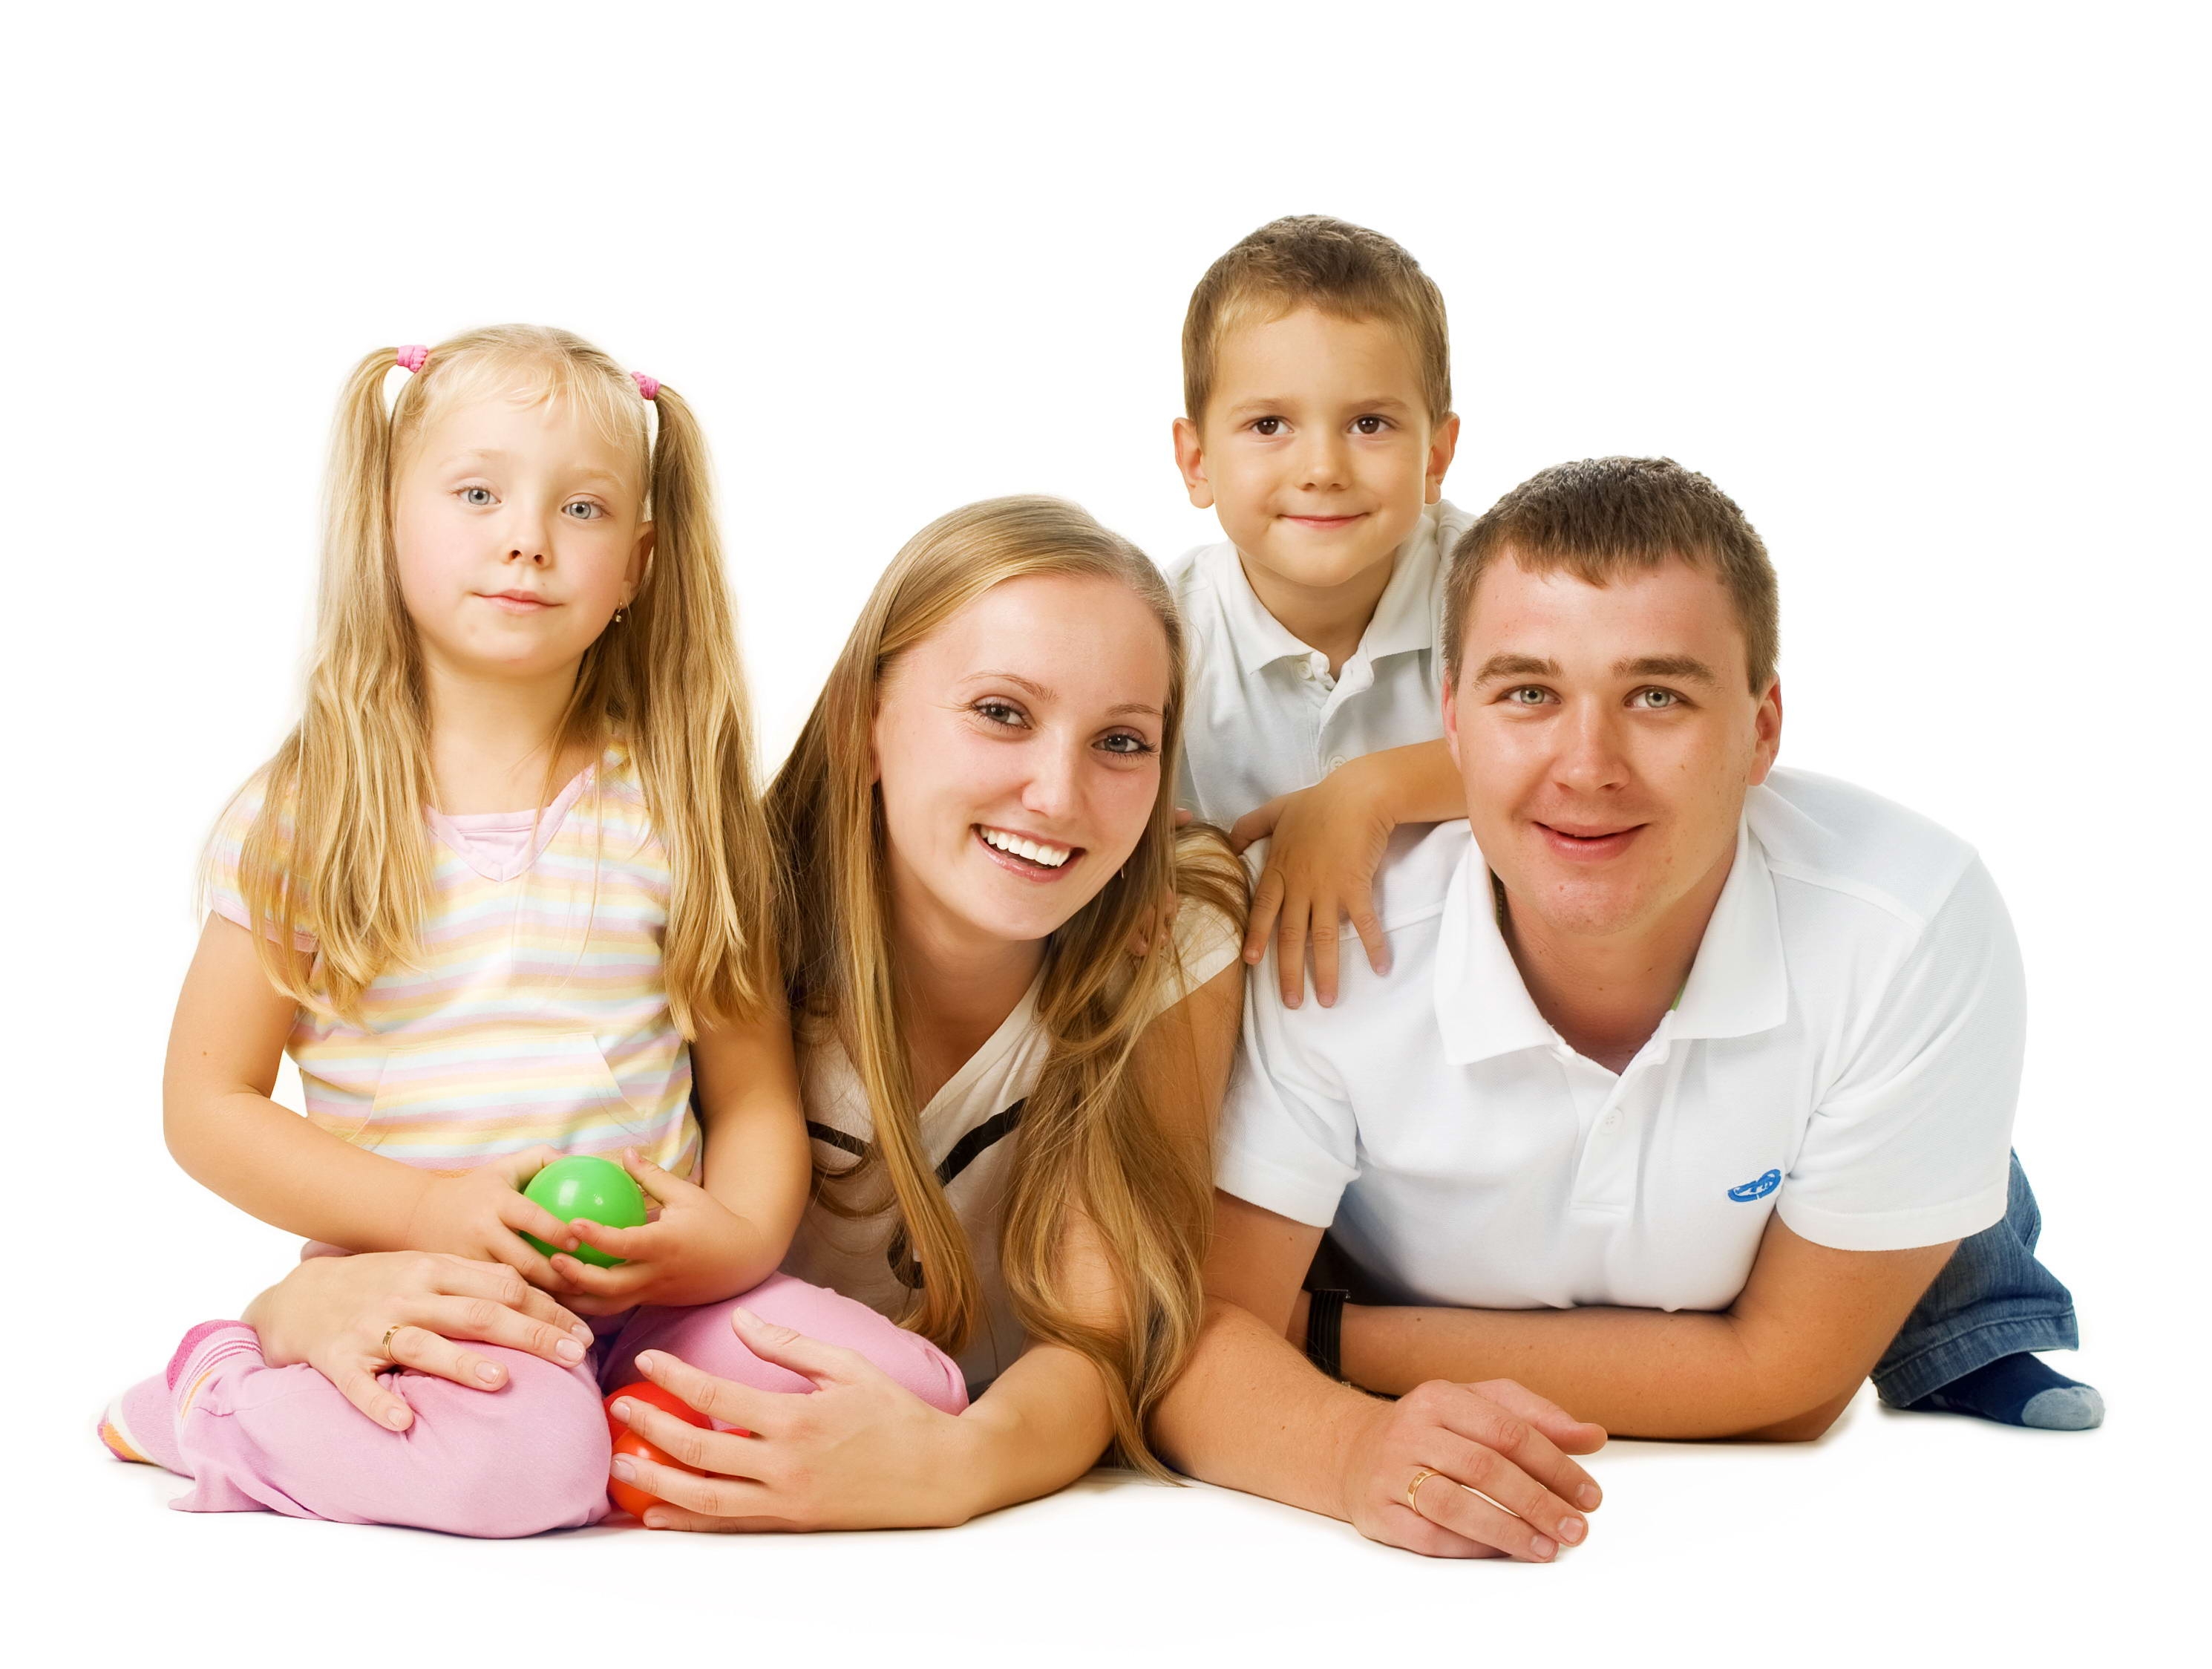  of happy family hd images photography Royalty free photography 3219